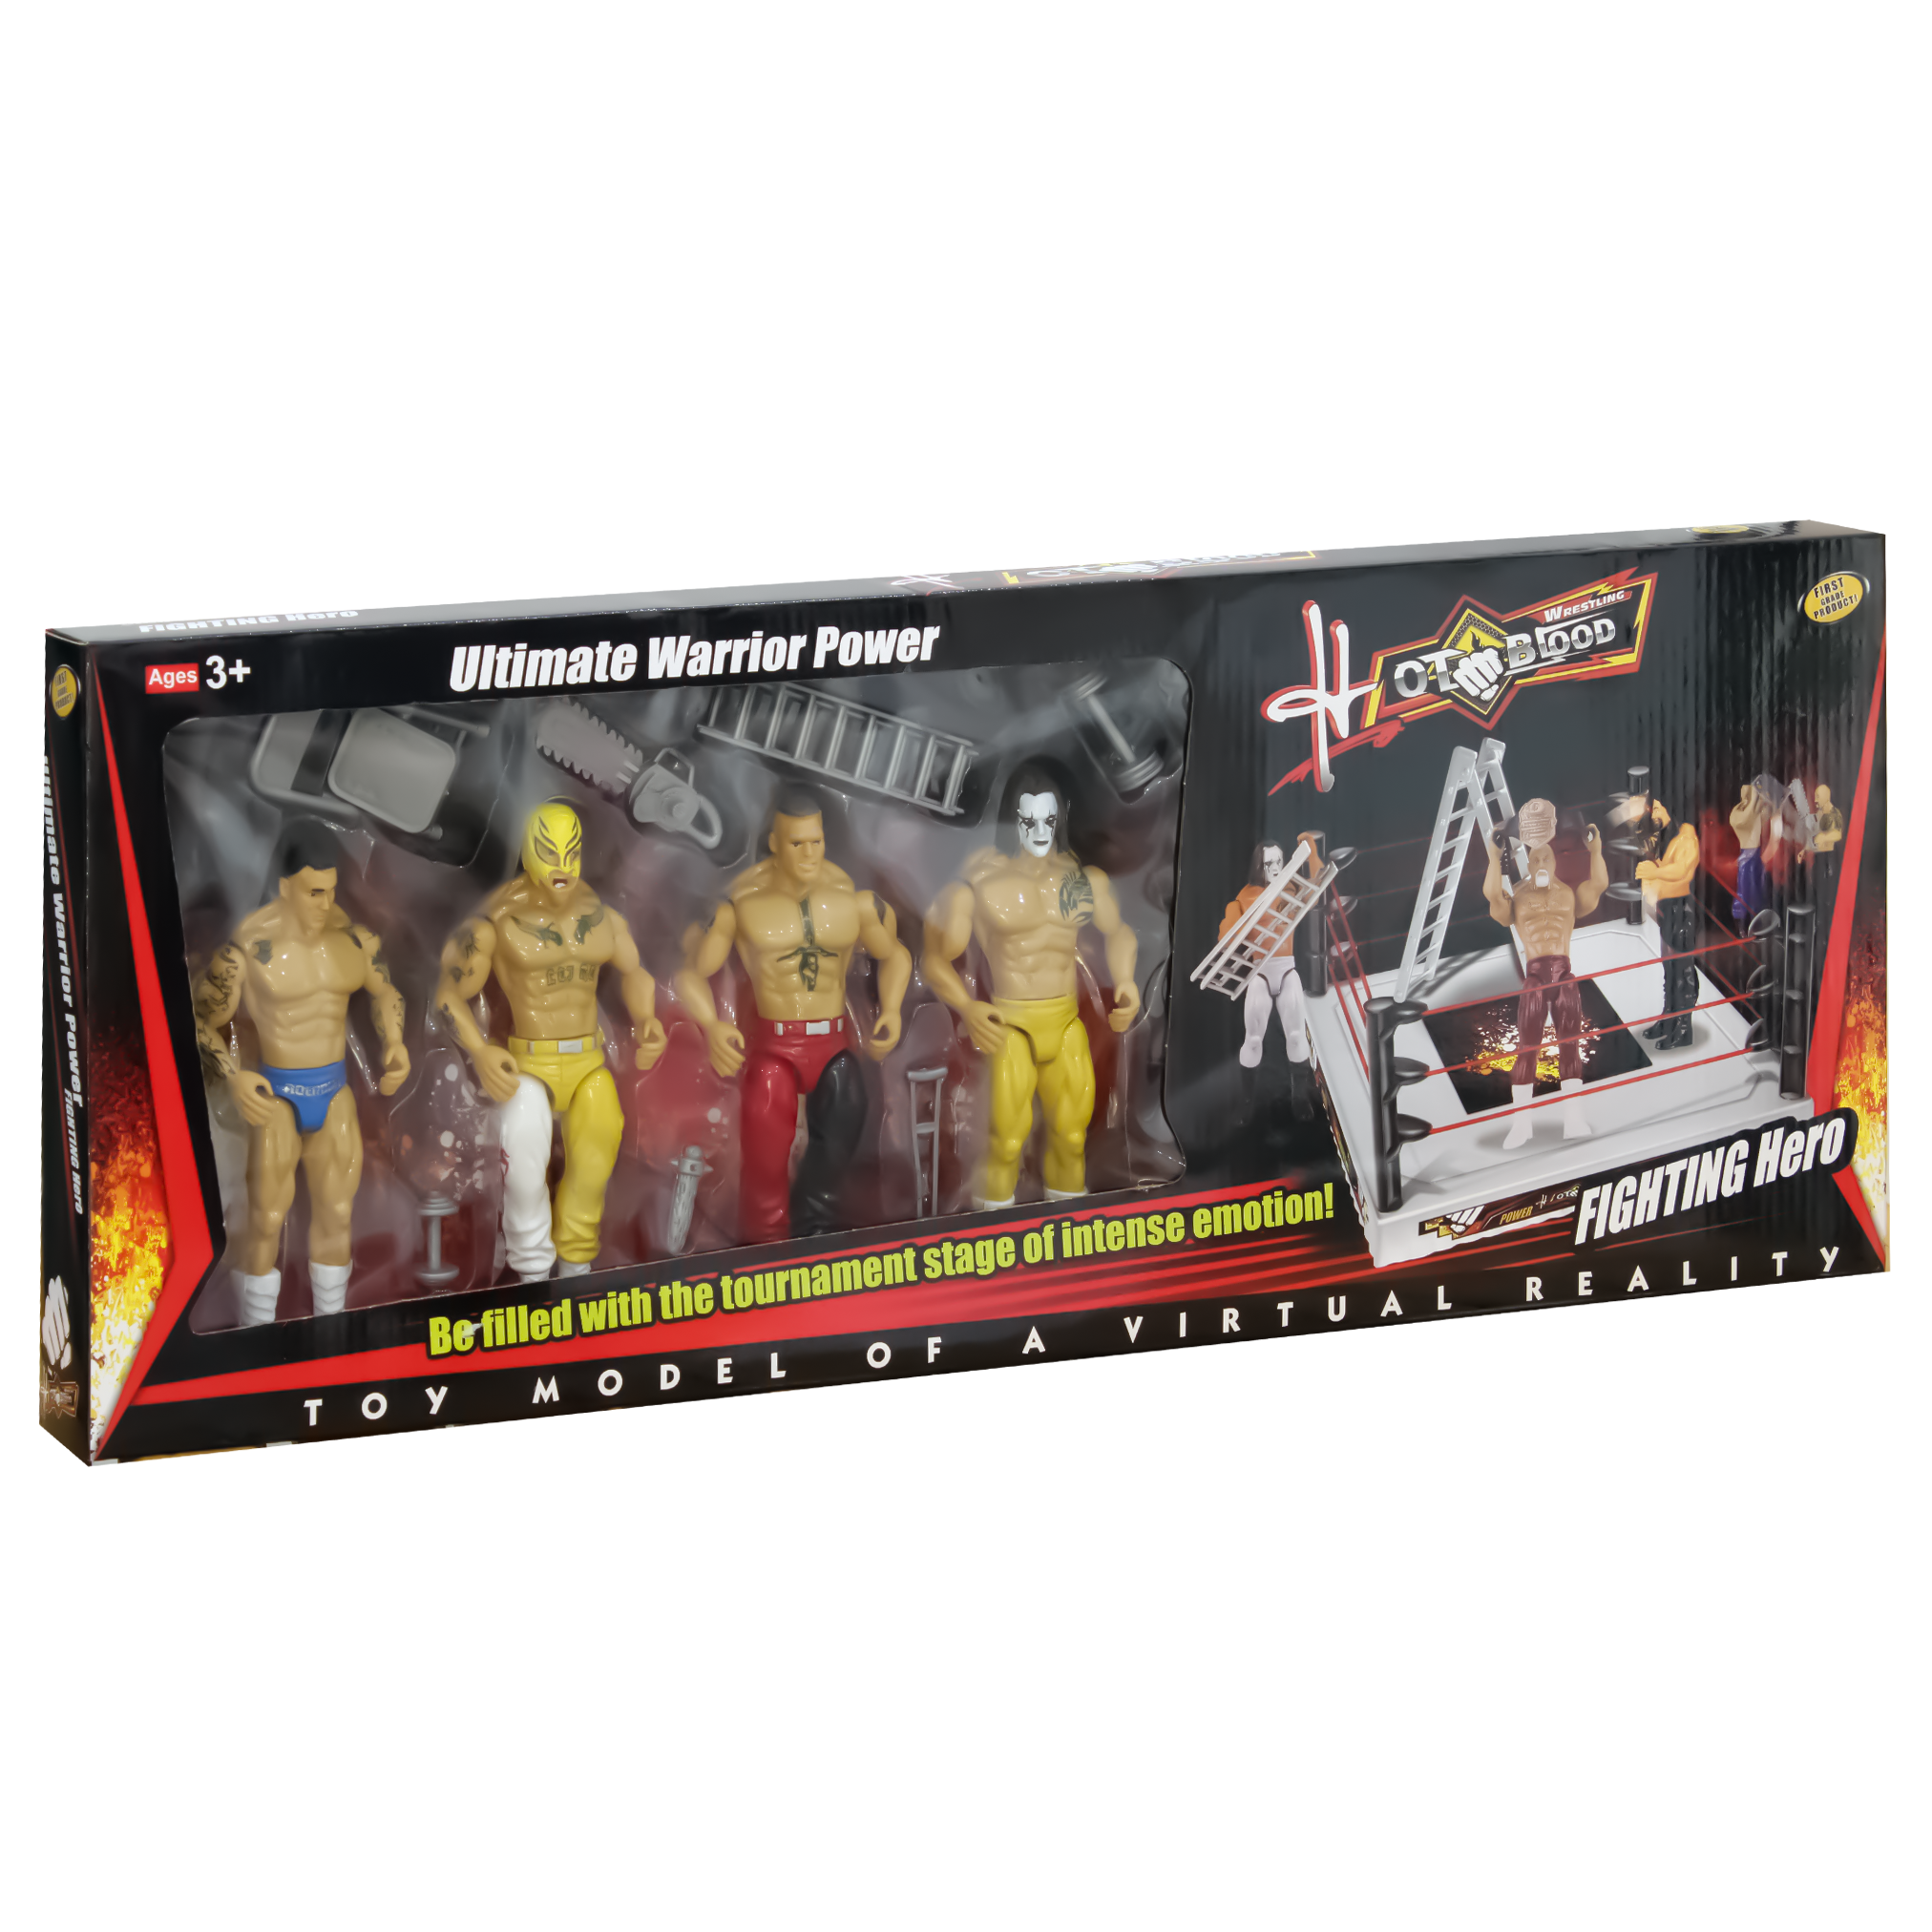 Generic FlexForce WWE Toys Action Figures World Ultimate Warrior Power Fighting Hero Model Virtual Reality 4 Flex Force Wrestling Heroes Toy - Model B (characters May Vary)